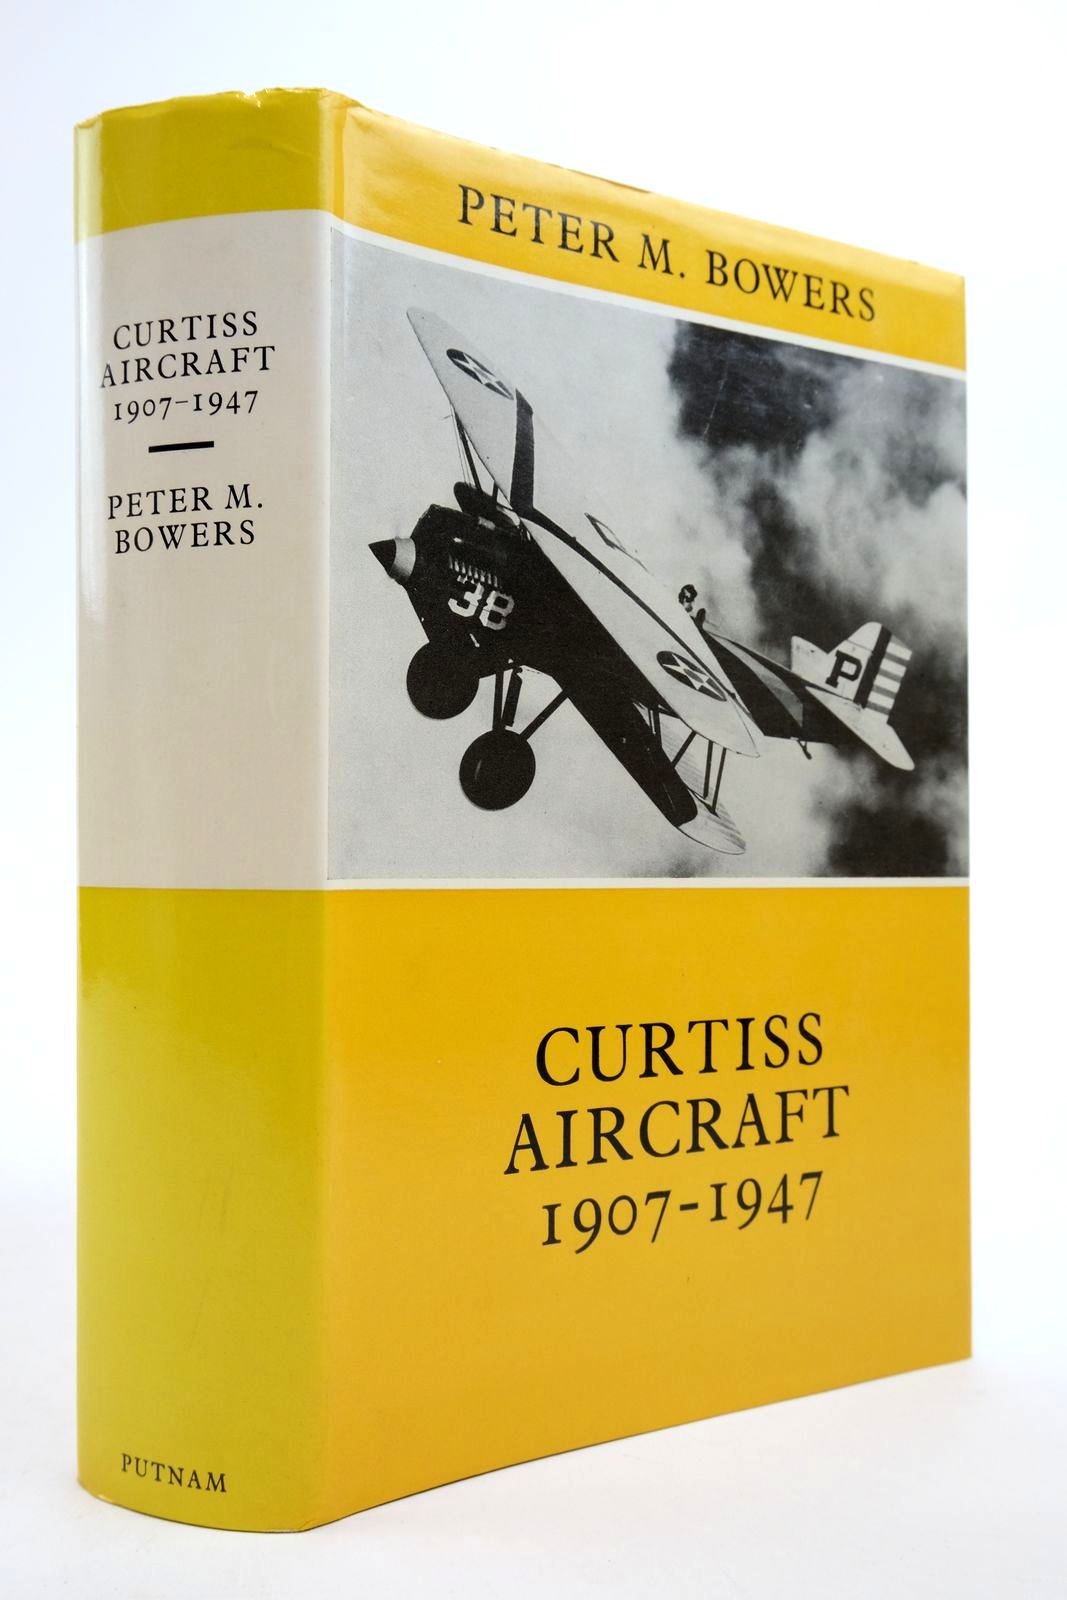 Photo of CURTISS AIRCRAFT 1907-1947 written by Bowers, Peter M. published by Putnam (STOCK CODE: 2139137)  for sale by Stella & Rose's Books